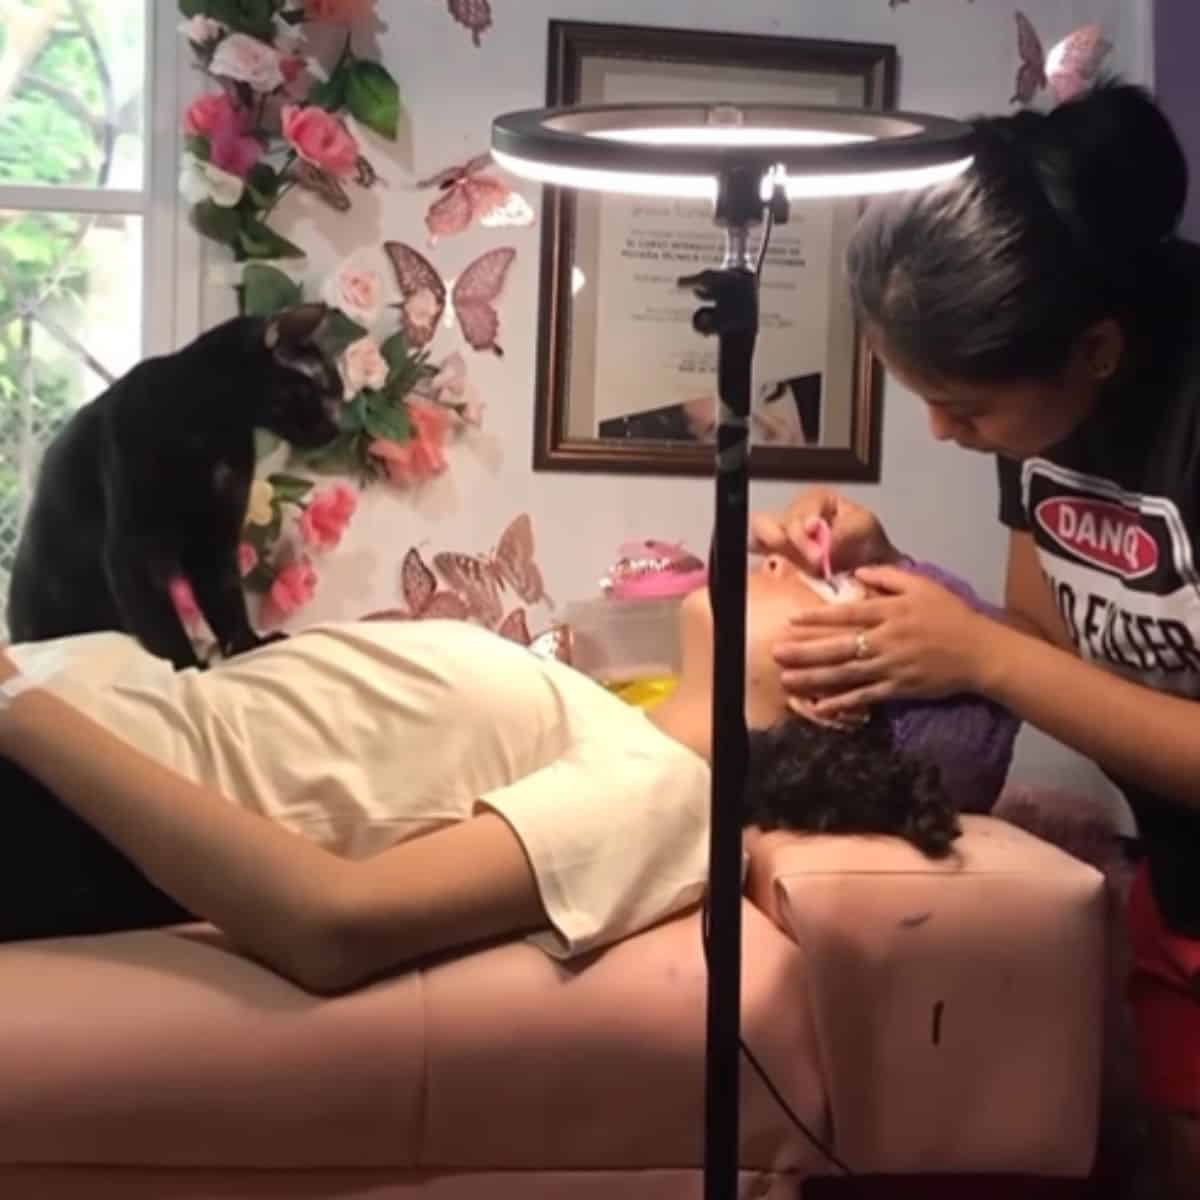 the cat follows the owner as she takes care of the client